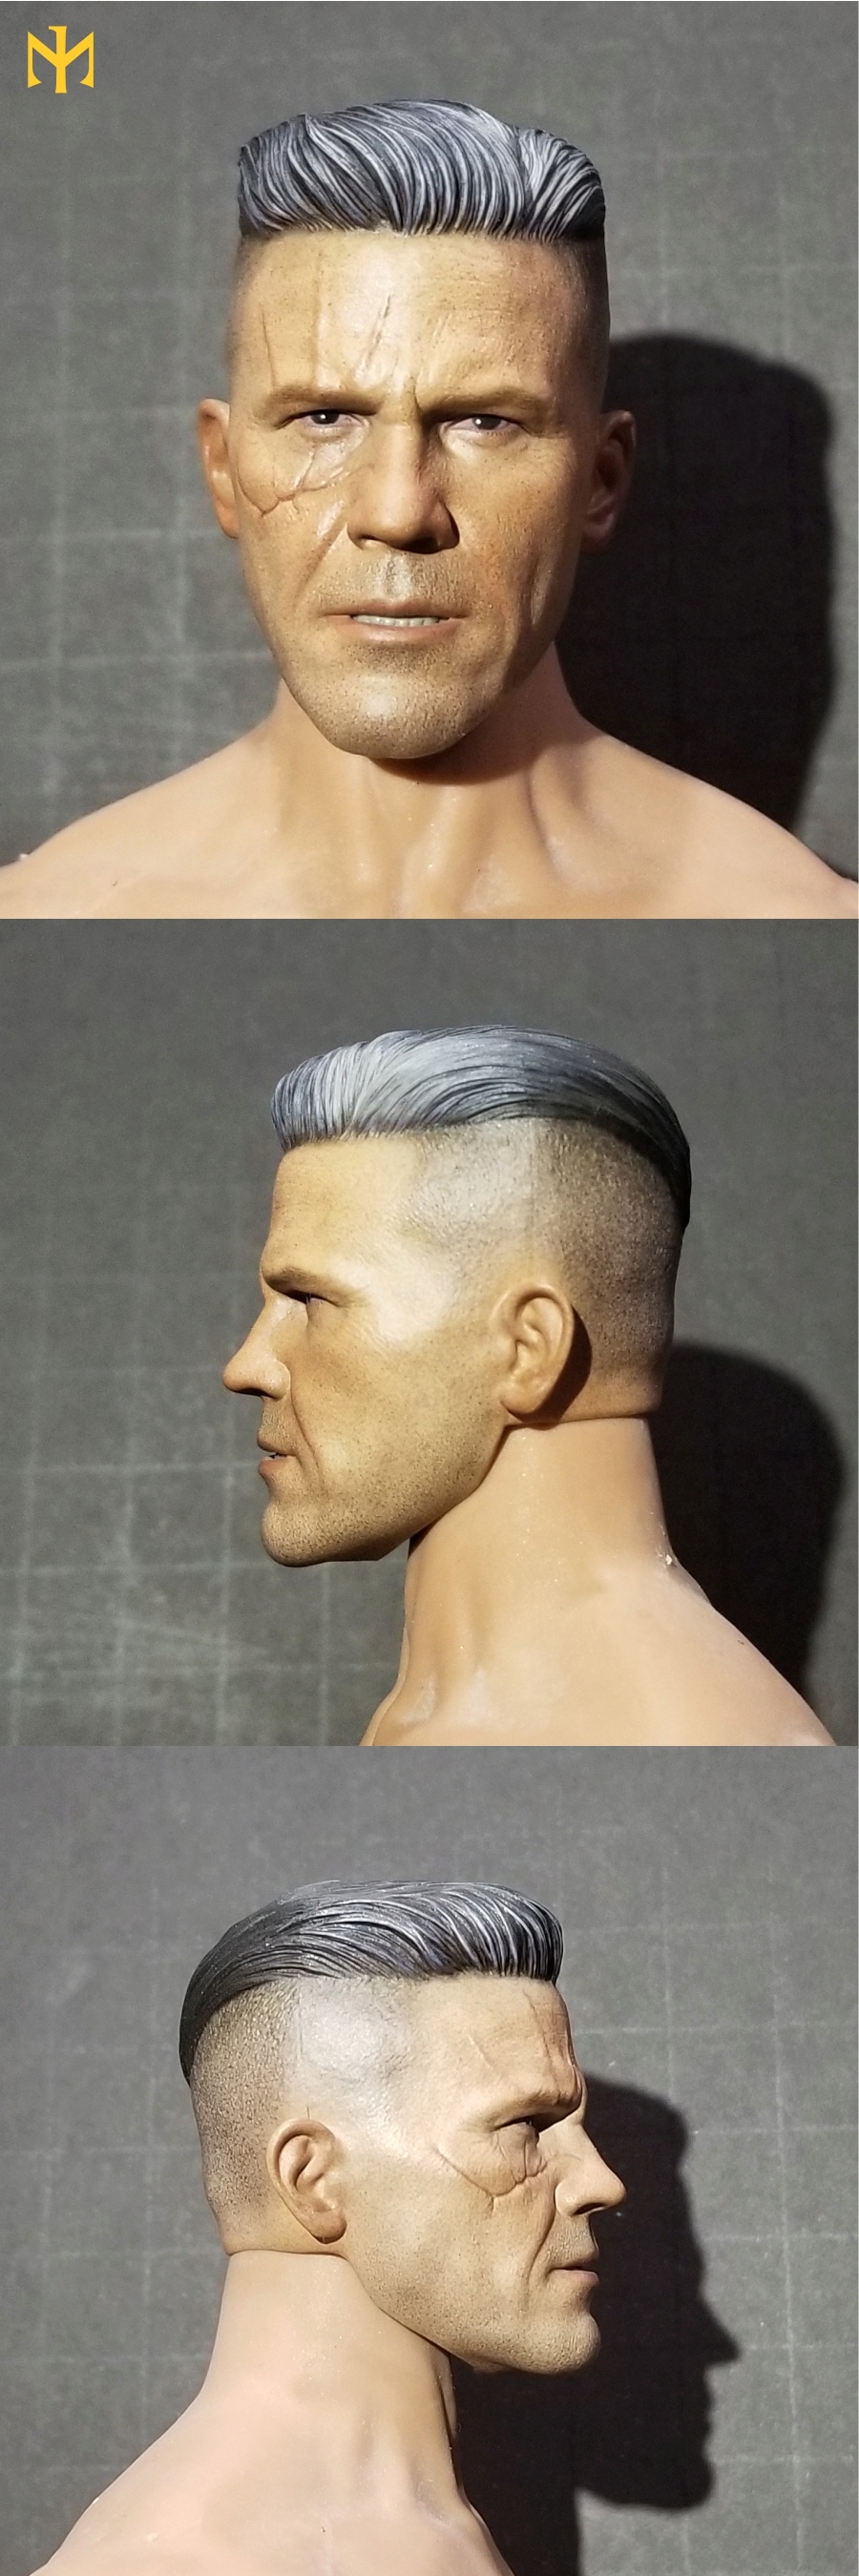 Head Sculpt General Catalog (contribute, but check out the rules) - Page 5 Dpiica10